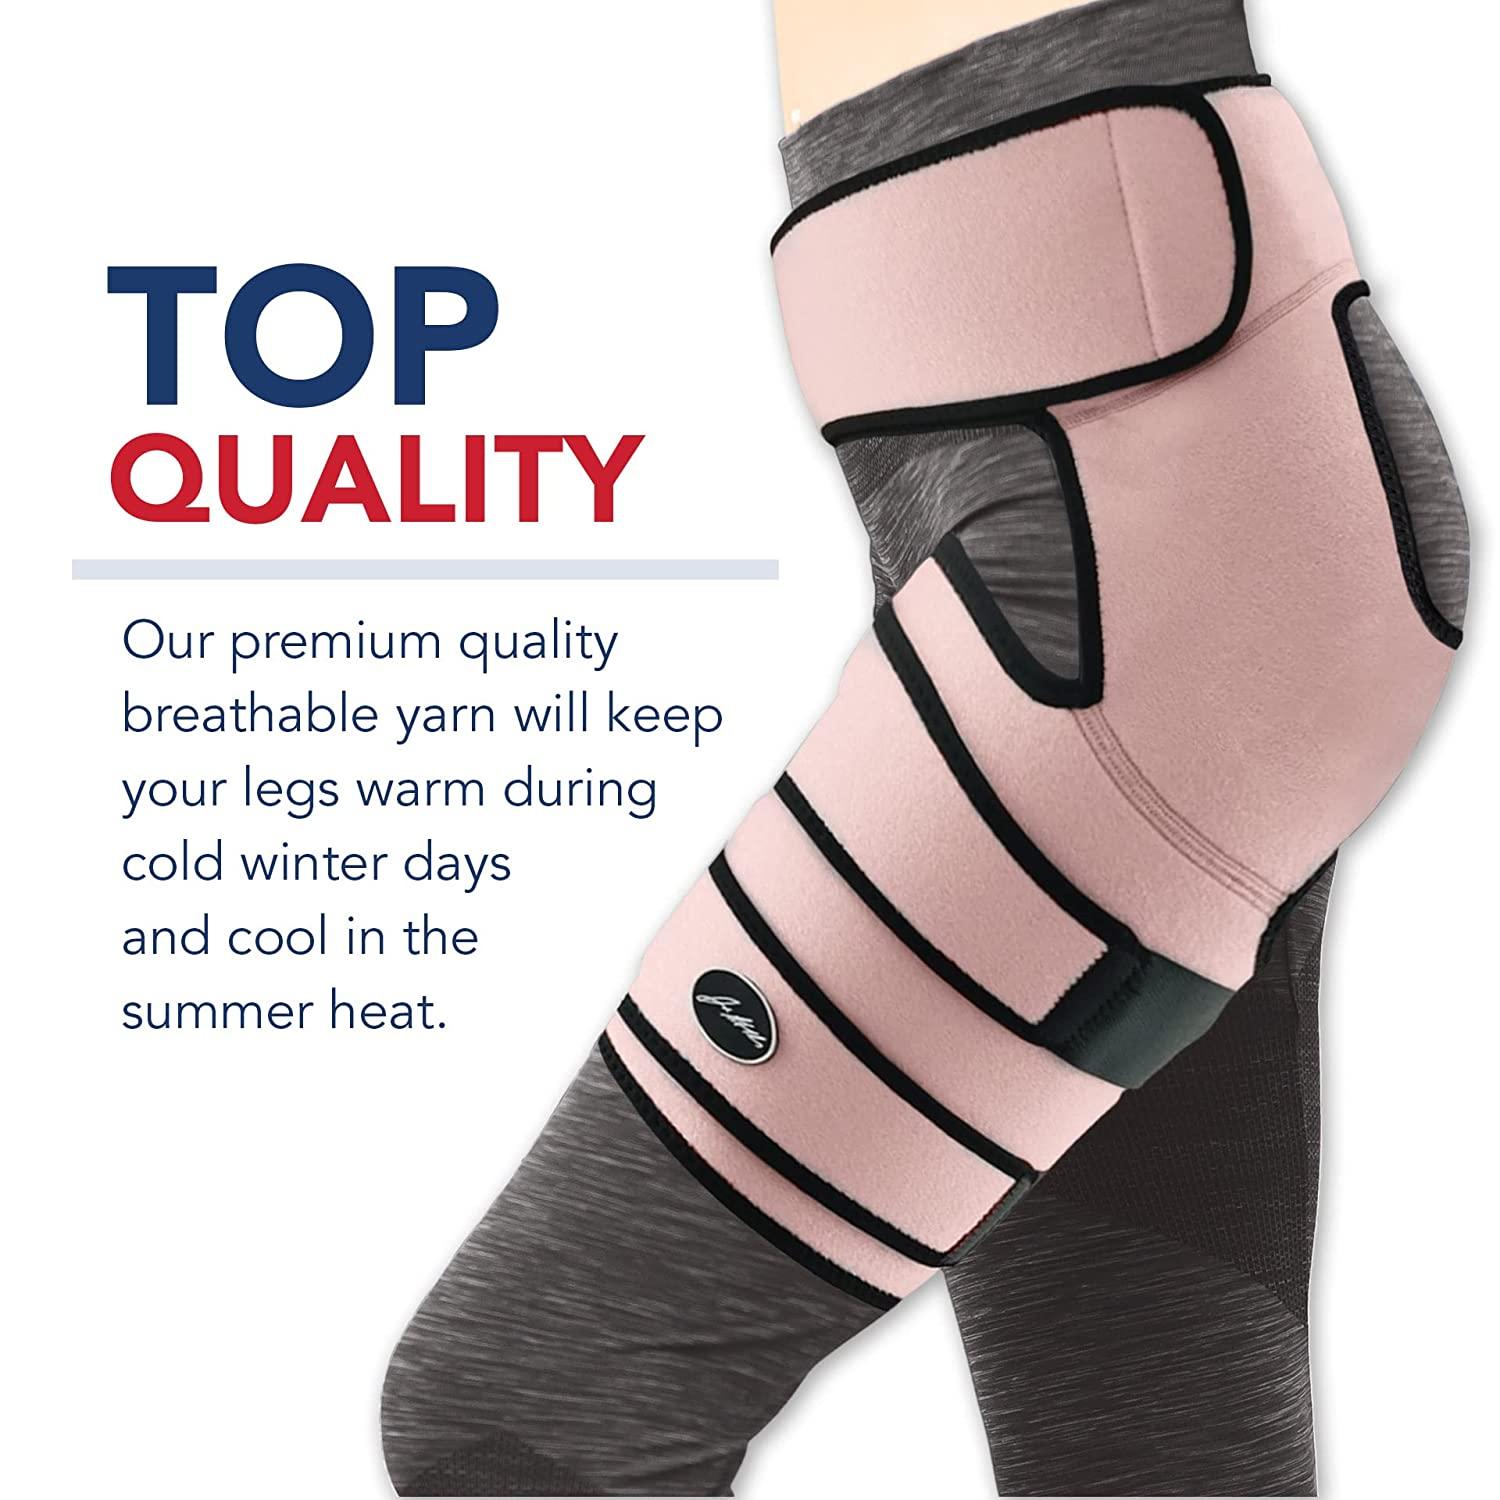 Doctor Developed Strengthening & Stabilizing Hip Brace for Men & Women -  Hip Brace for Sciatica Pain Relief - Compression Wrap for Hip Pain - Hip